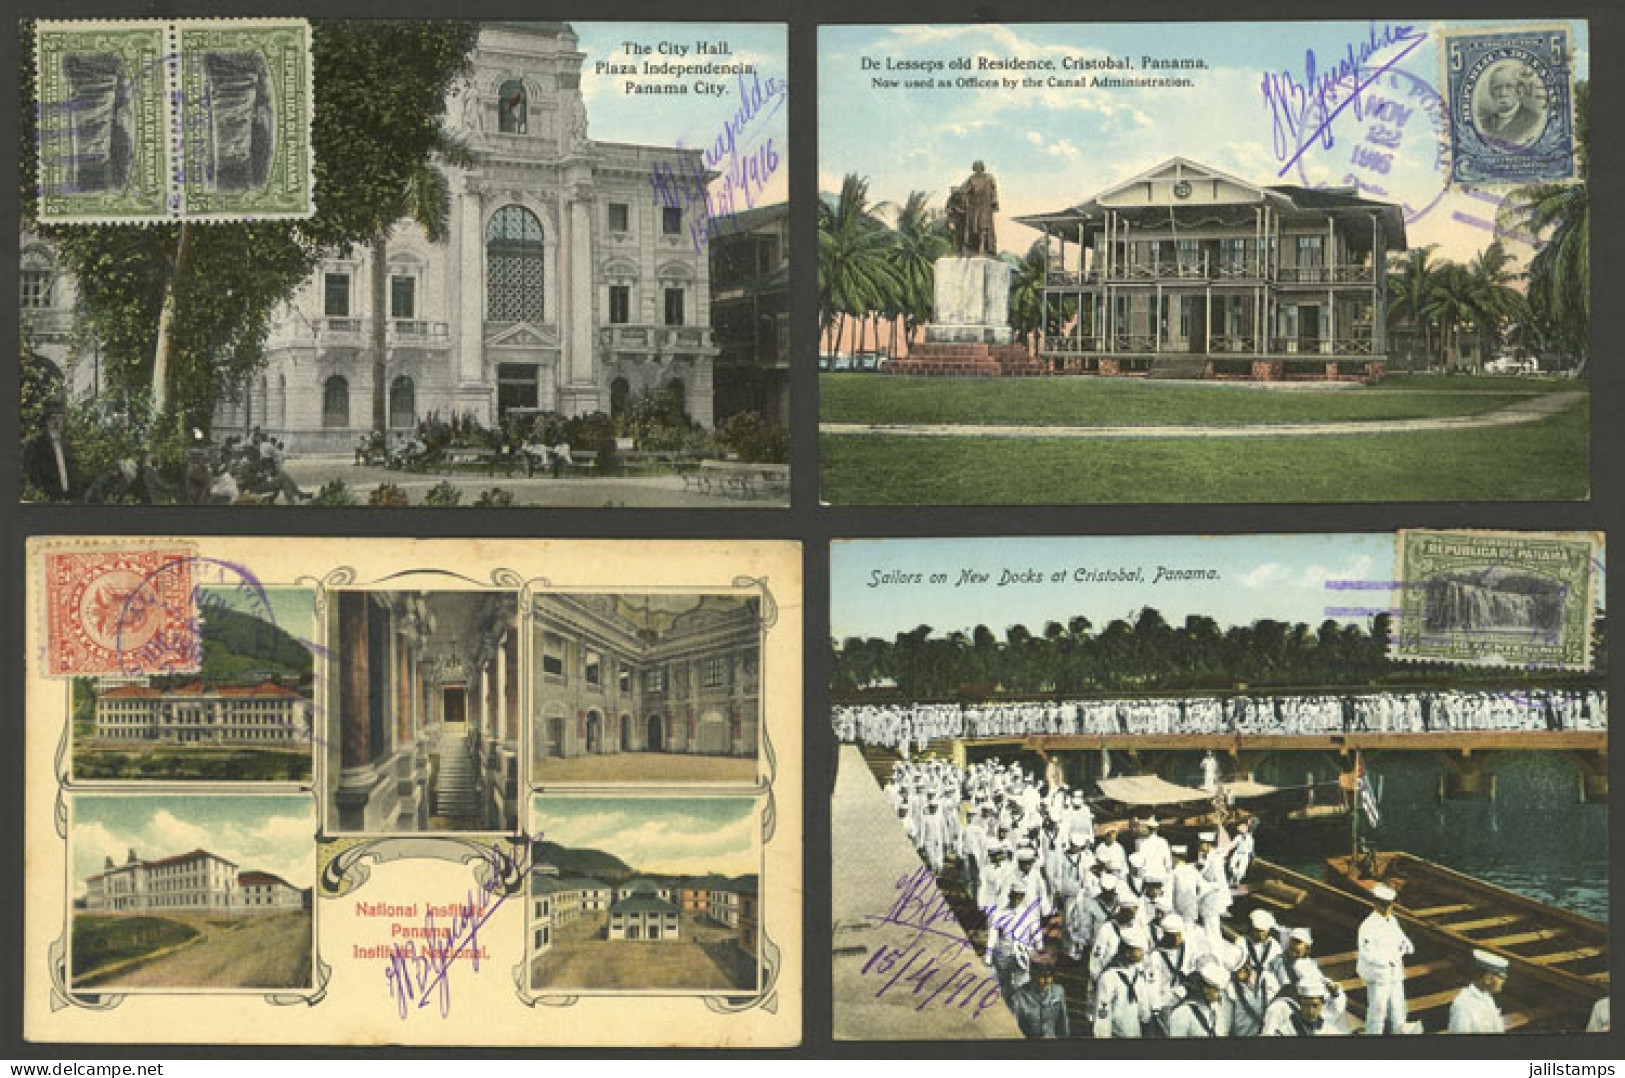 PANAMA: 13 Old Postcards With Very Good Views, Sent To Argentina In 1916 With Nice Postages And Cancels, Very Fine Gener - Panamá